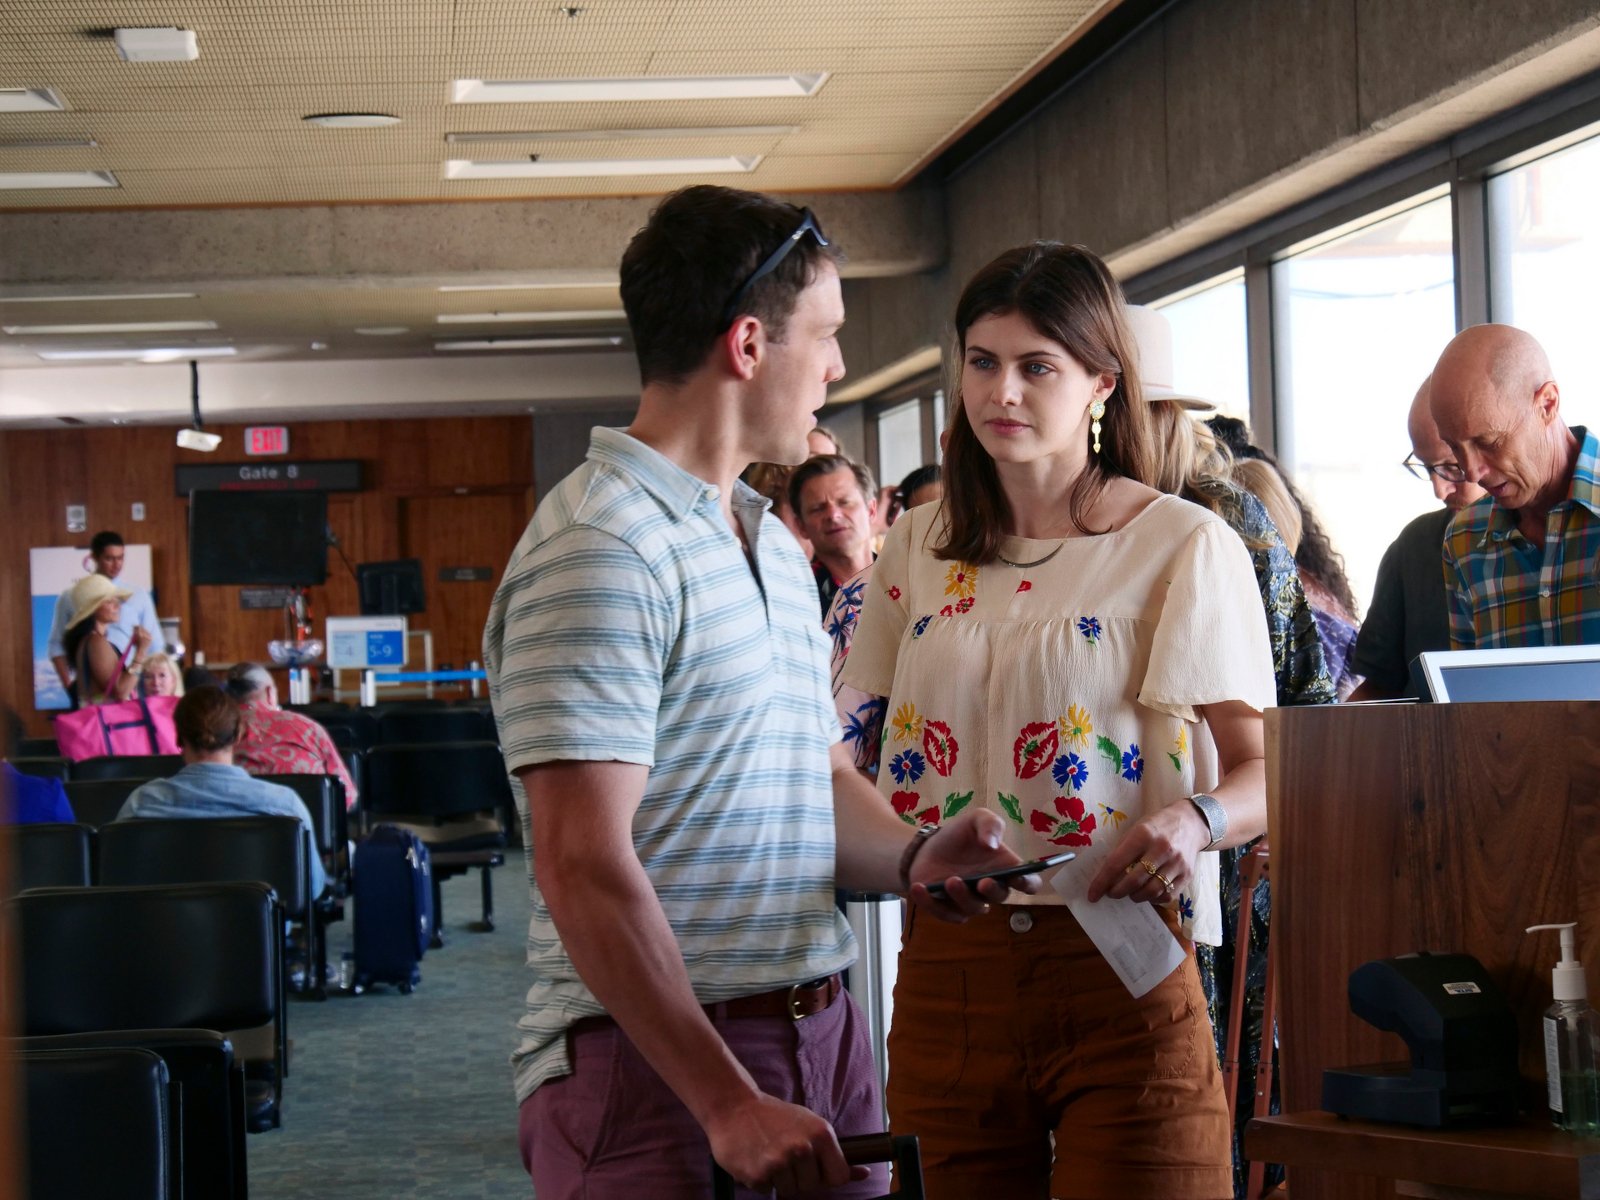 Jake Lacy and Alexandra Daddario in 'The White Lotus' finale. Lacy's character wears a blue and white striped polo and is looking at Daddario. She's wearing a beige shirt with flowers and has red eyes from crying. They're standing in an airport.